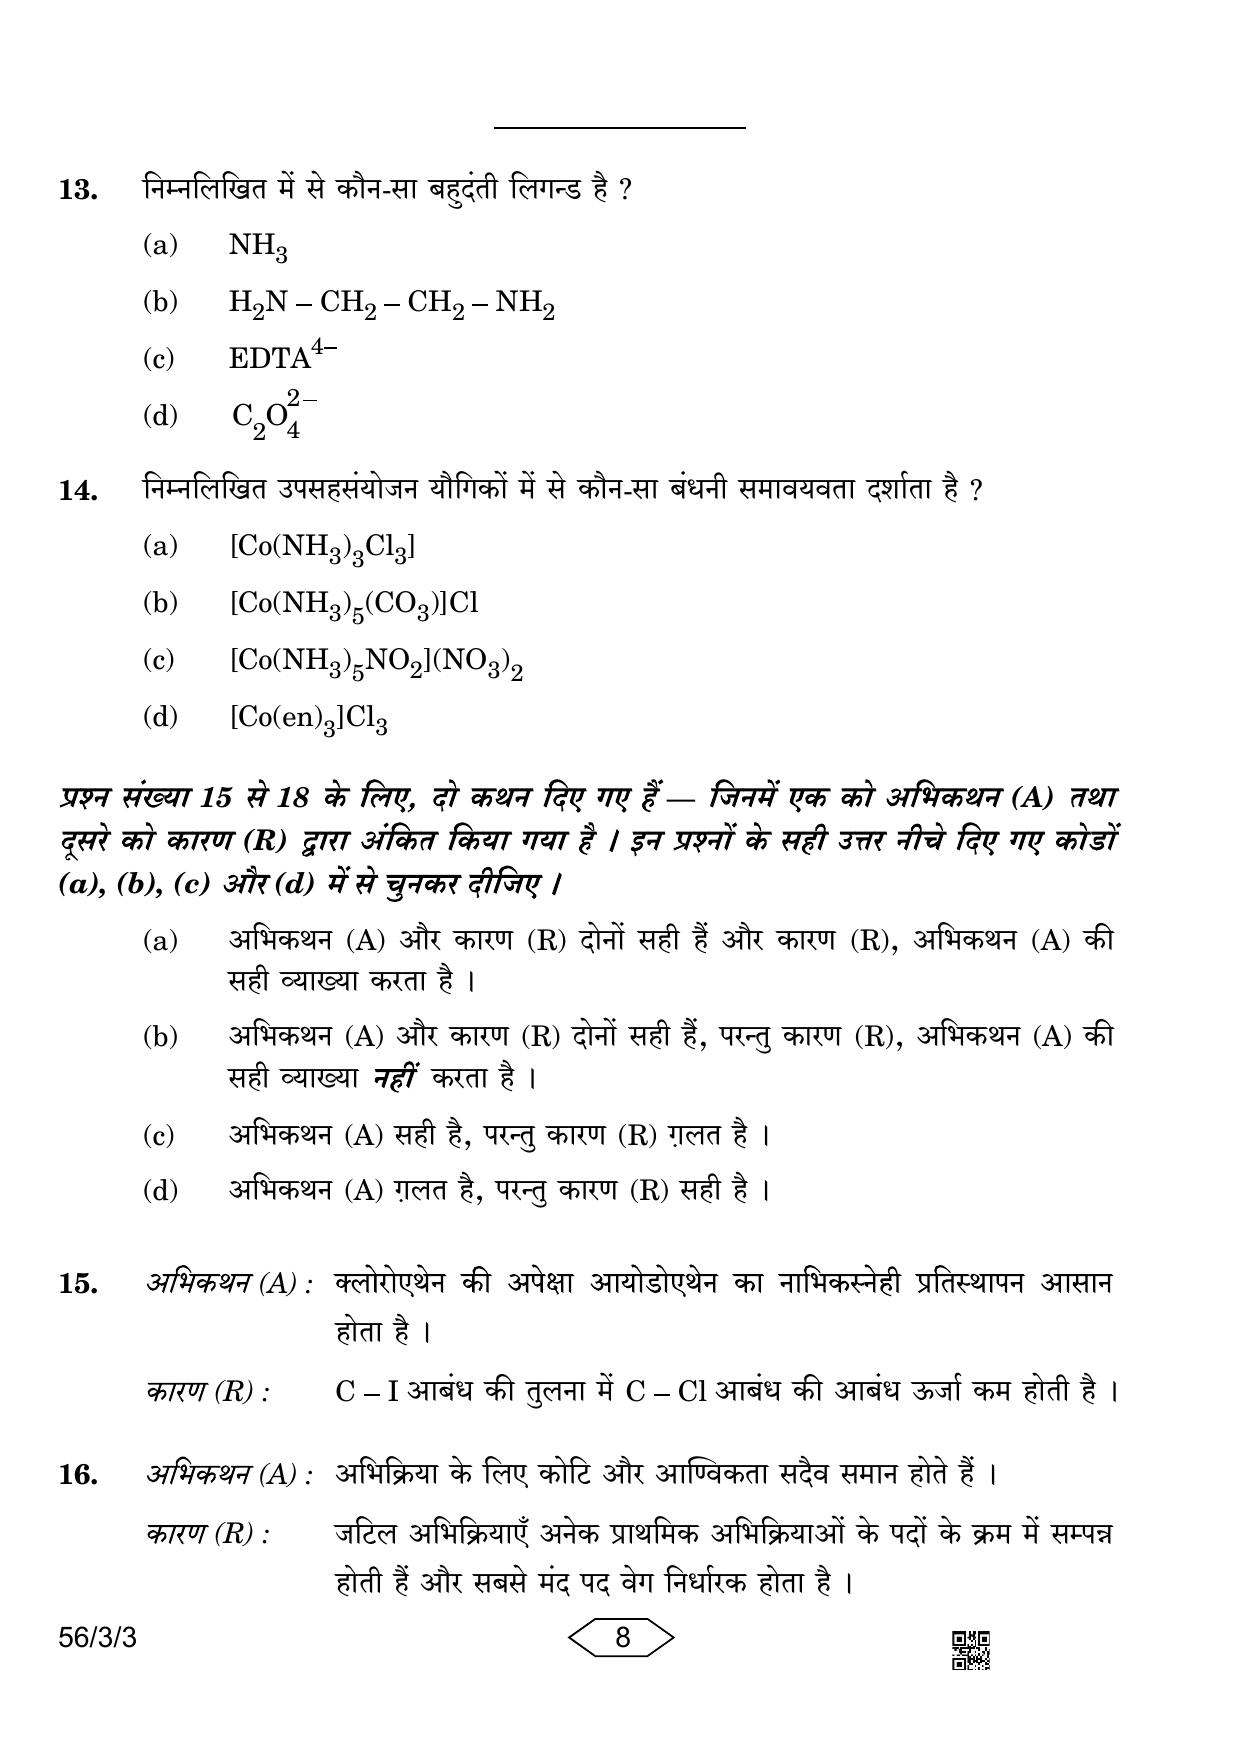 CBSE Class 12 56-3-3 Chemistry 2023 Question Paper - Page 8